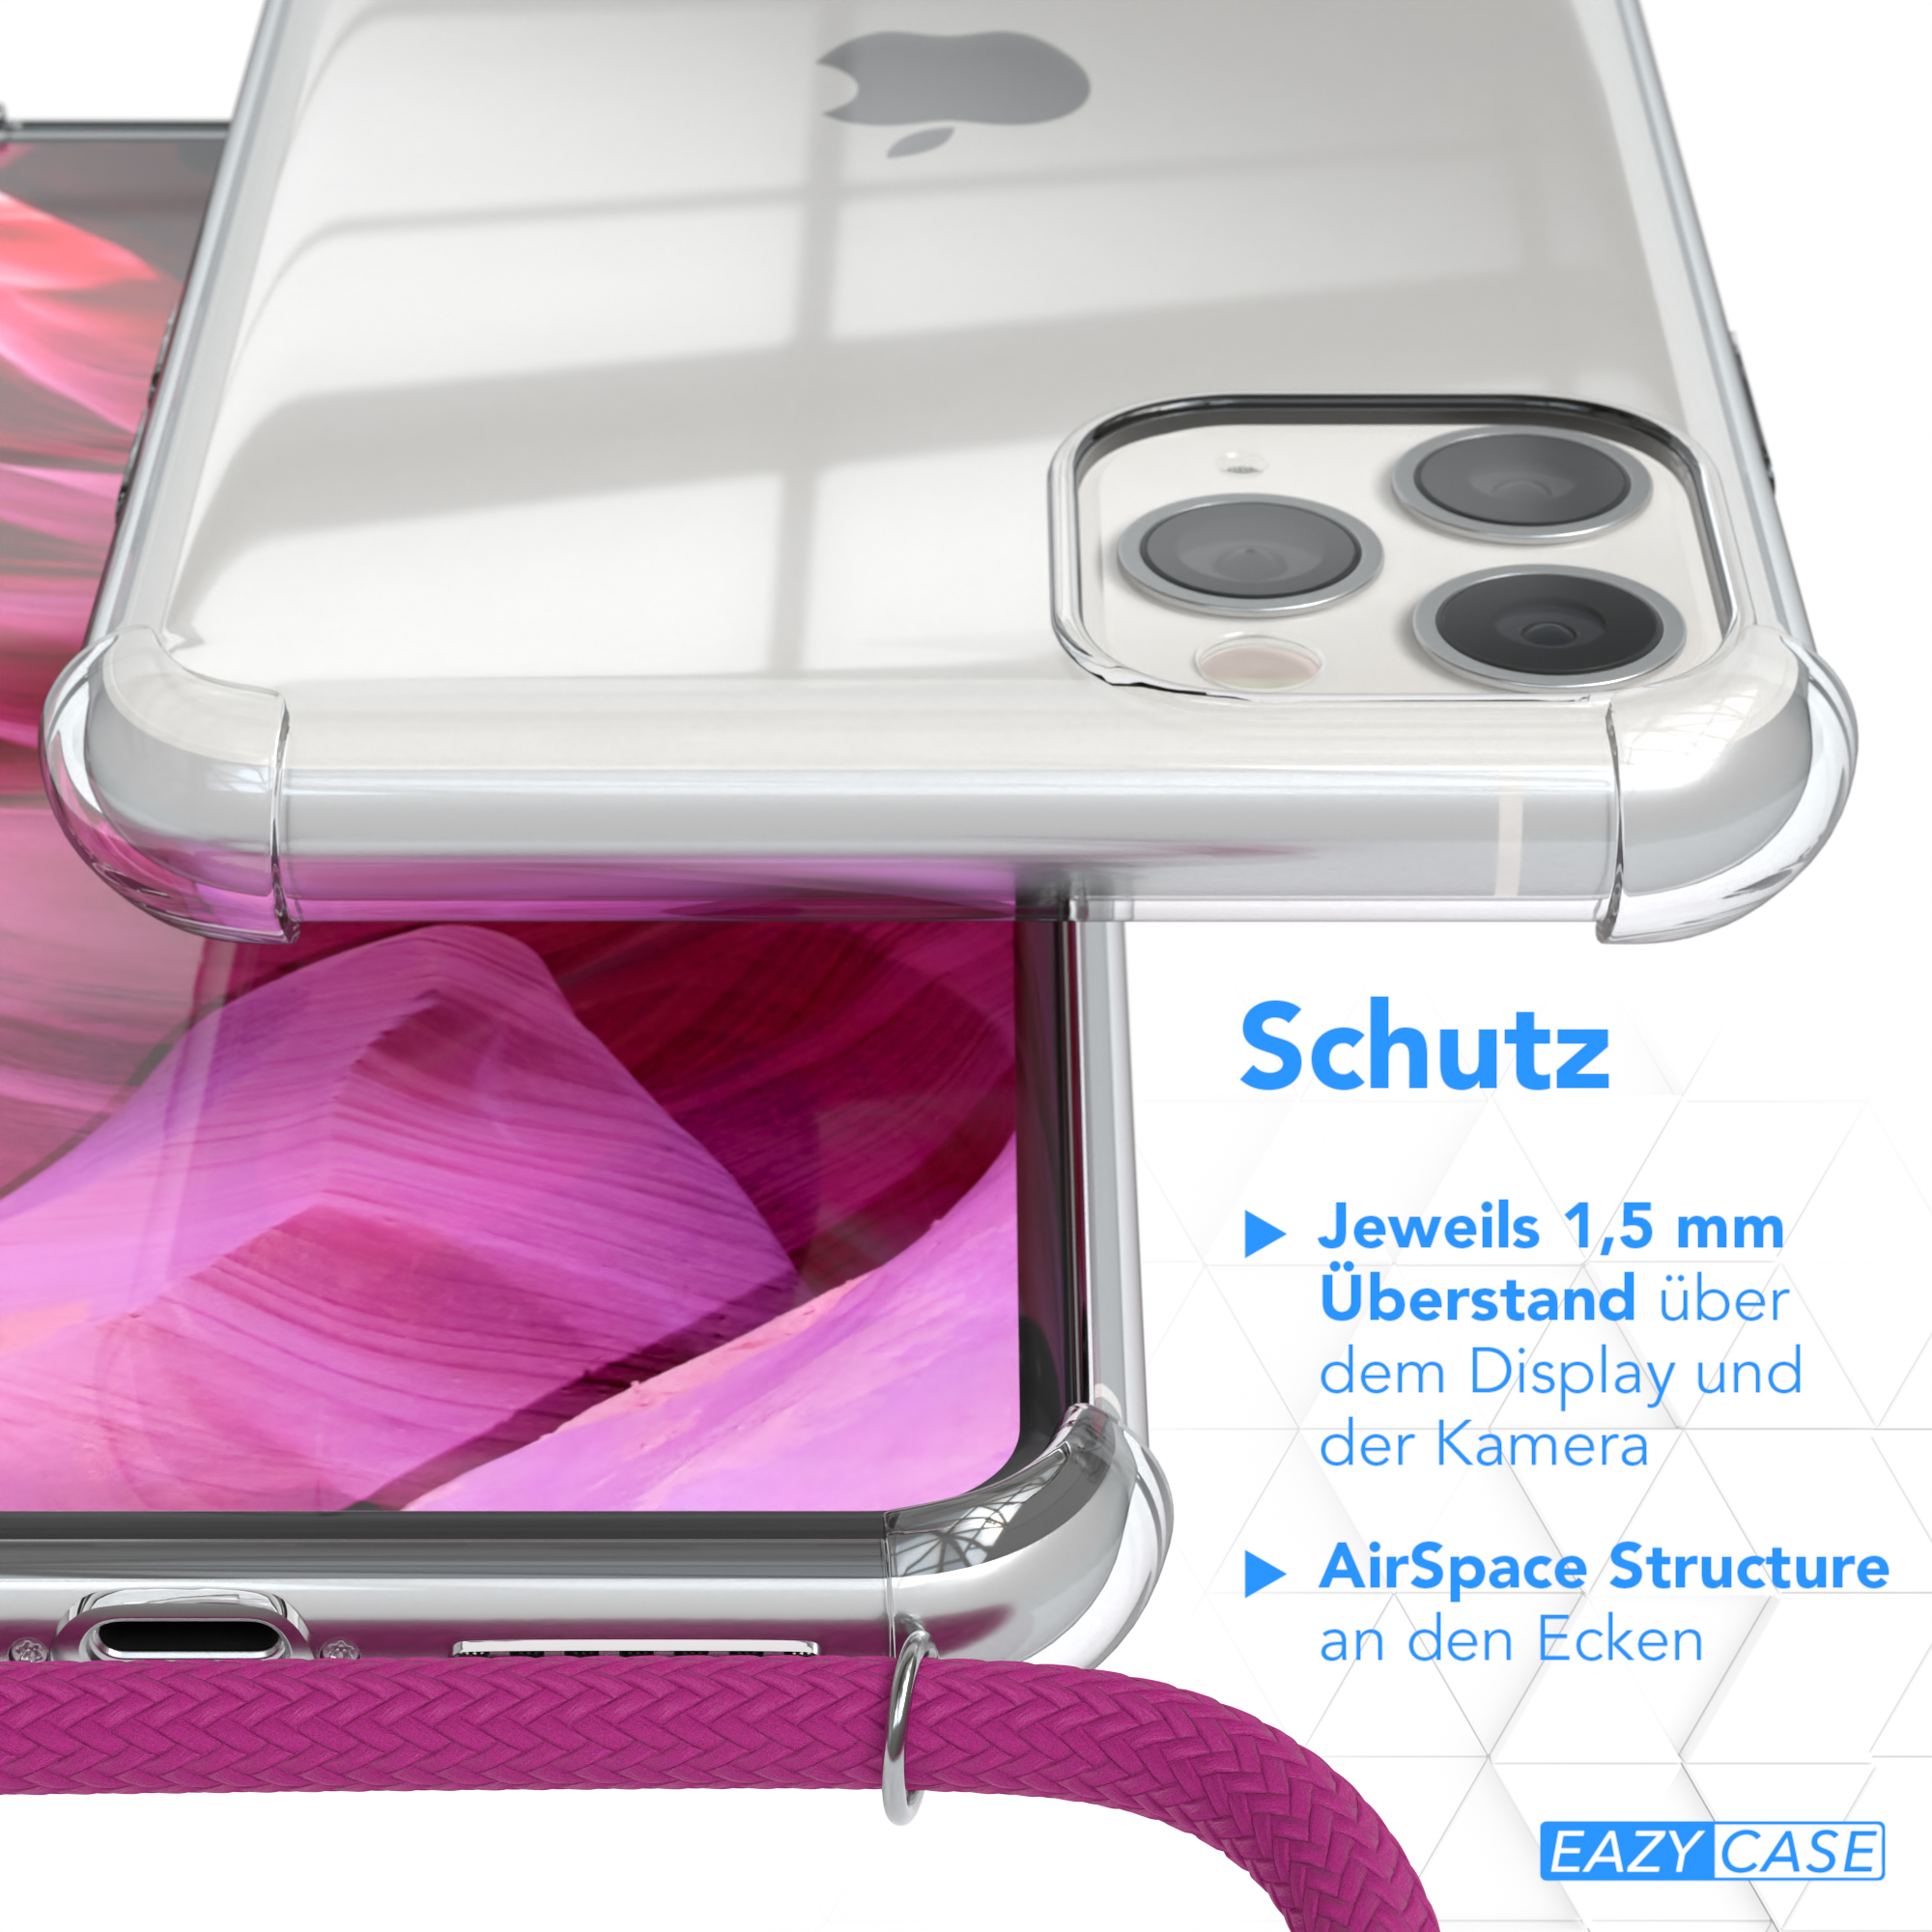 EAZY CASE Chain normal, Umhängetasche, iPhone 11 Pink / Max, Clips Silber Pro Apple